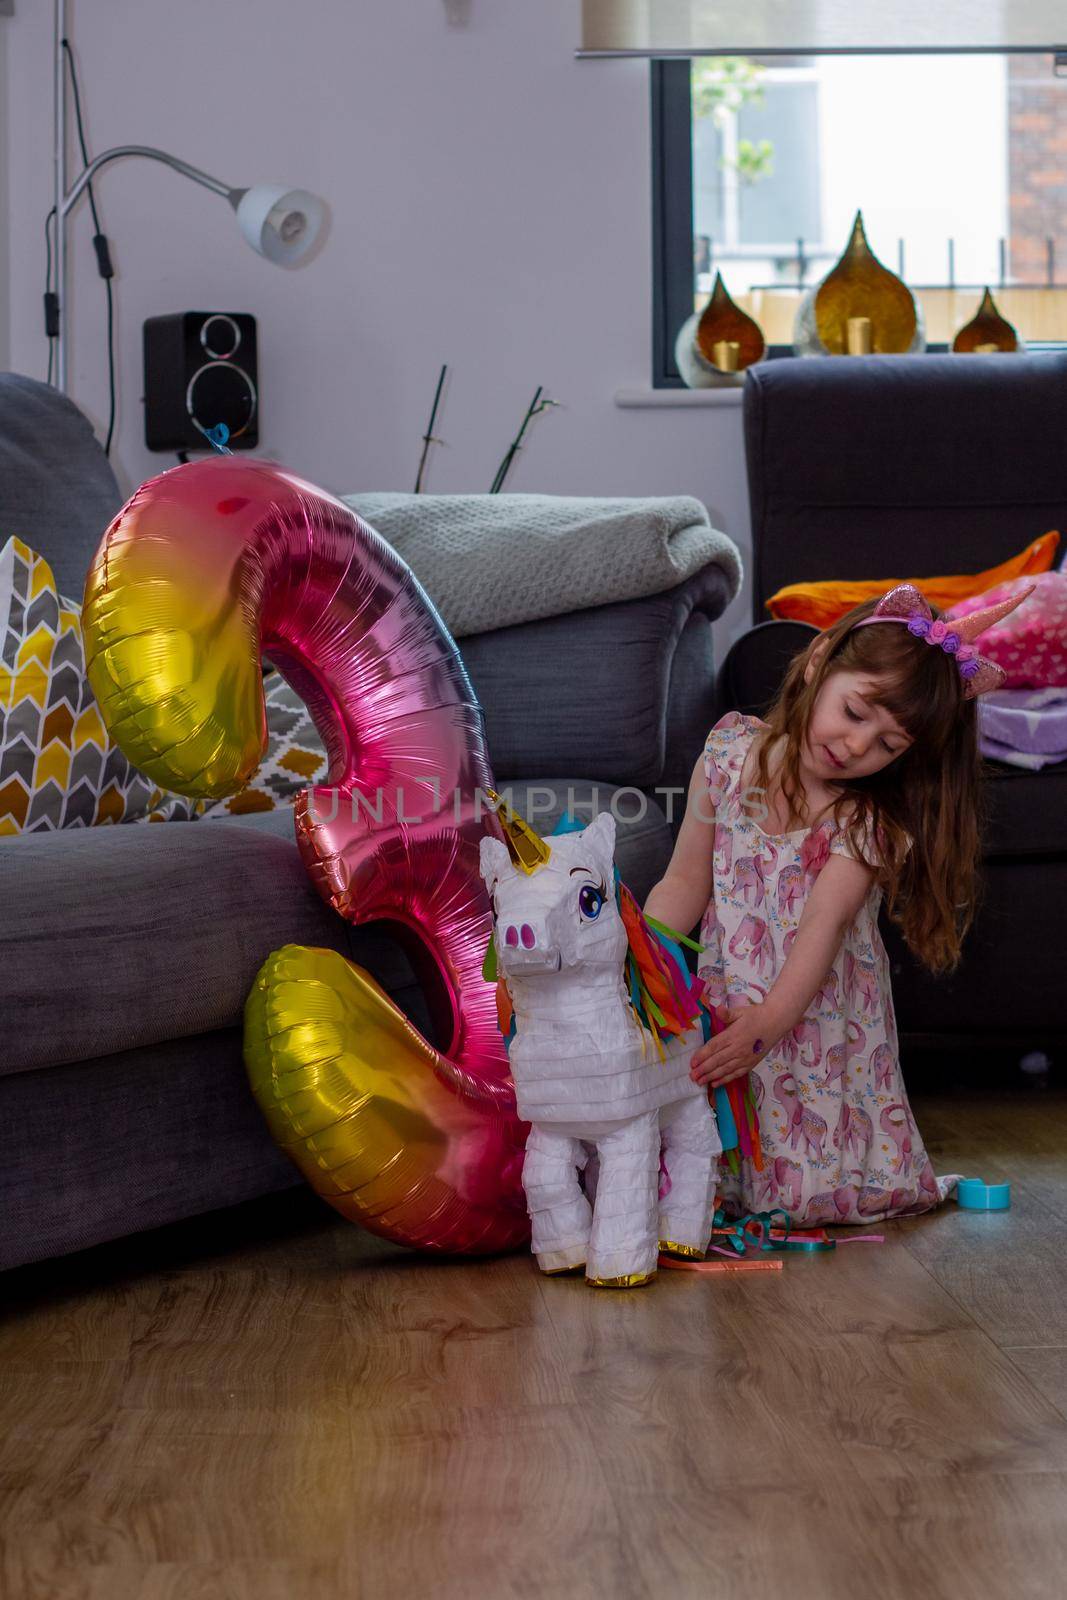 A Cute Baby Girl Sitting On The Floor With a Balloon And An Unicorn Pinata by AlbertoPascual